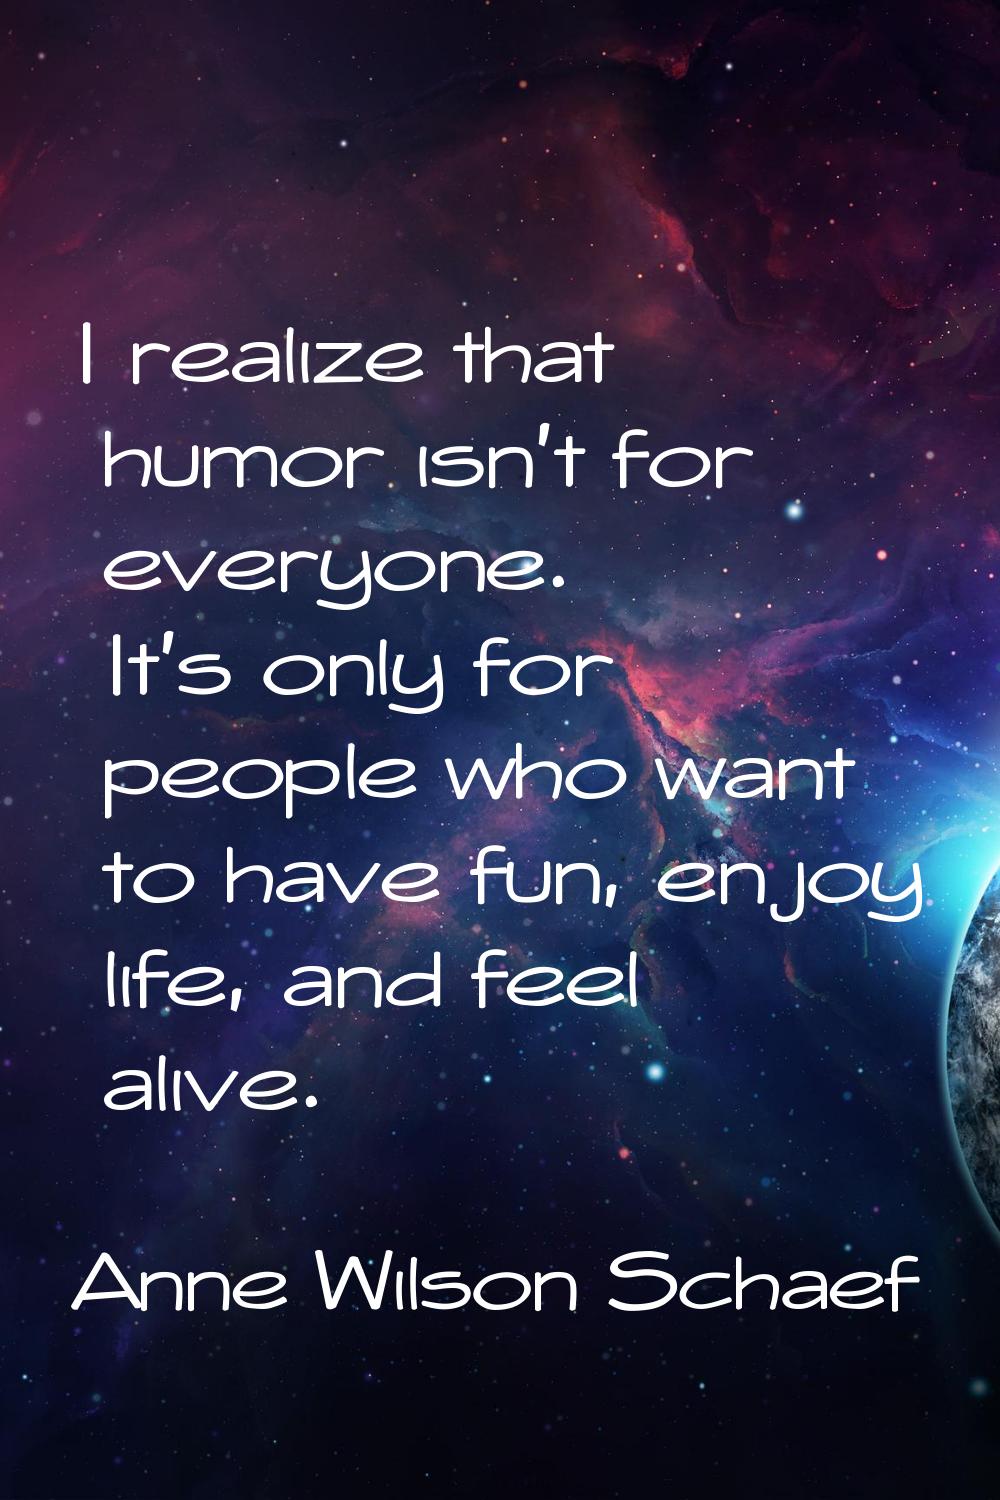 I realize that humor isn't for everyone. It's only for people who want to have fun, enjoy life, and